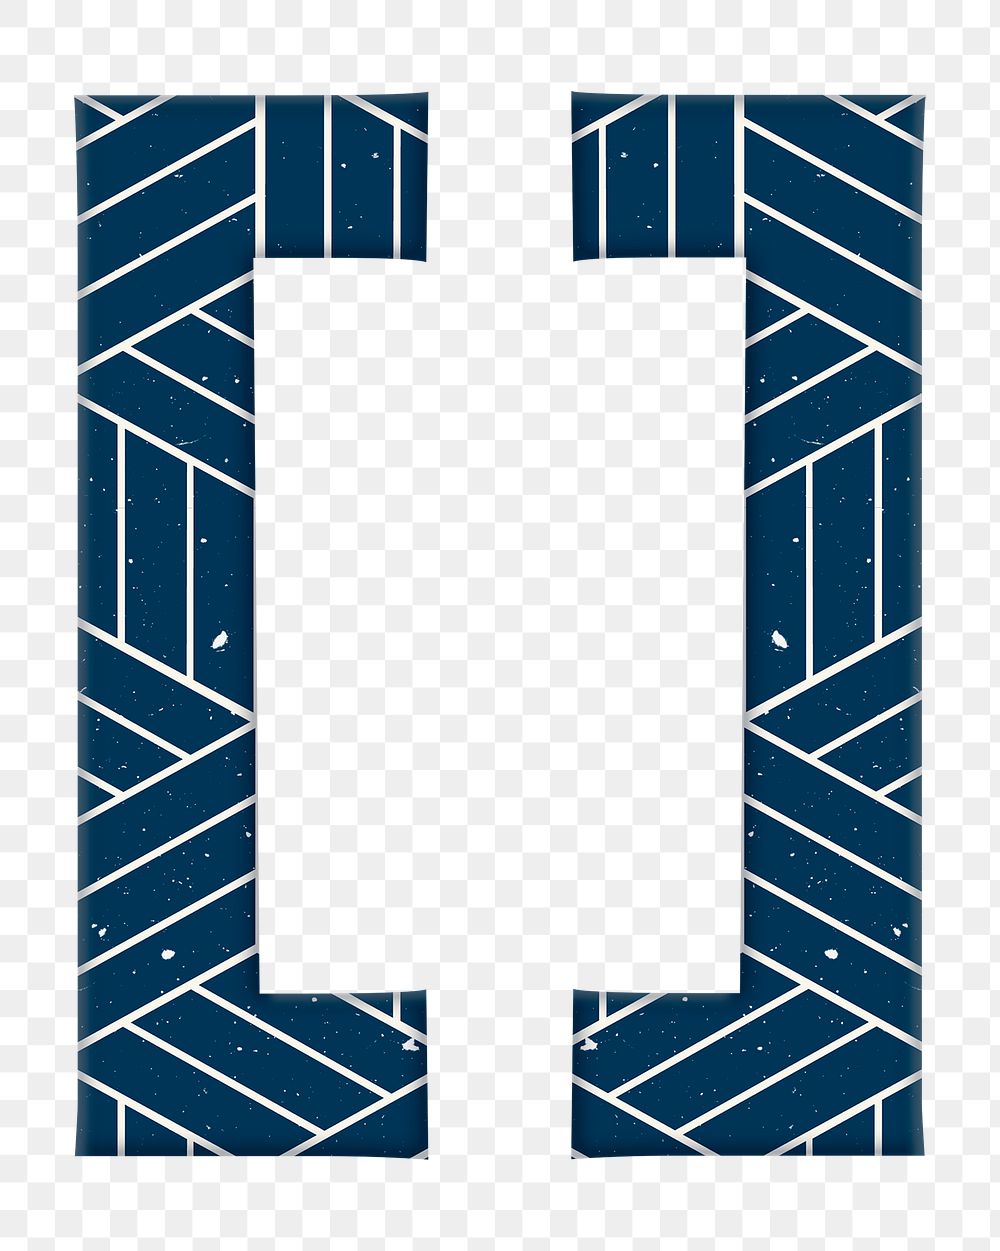 Png square brackets geometric Japanese inspired pattern font